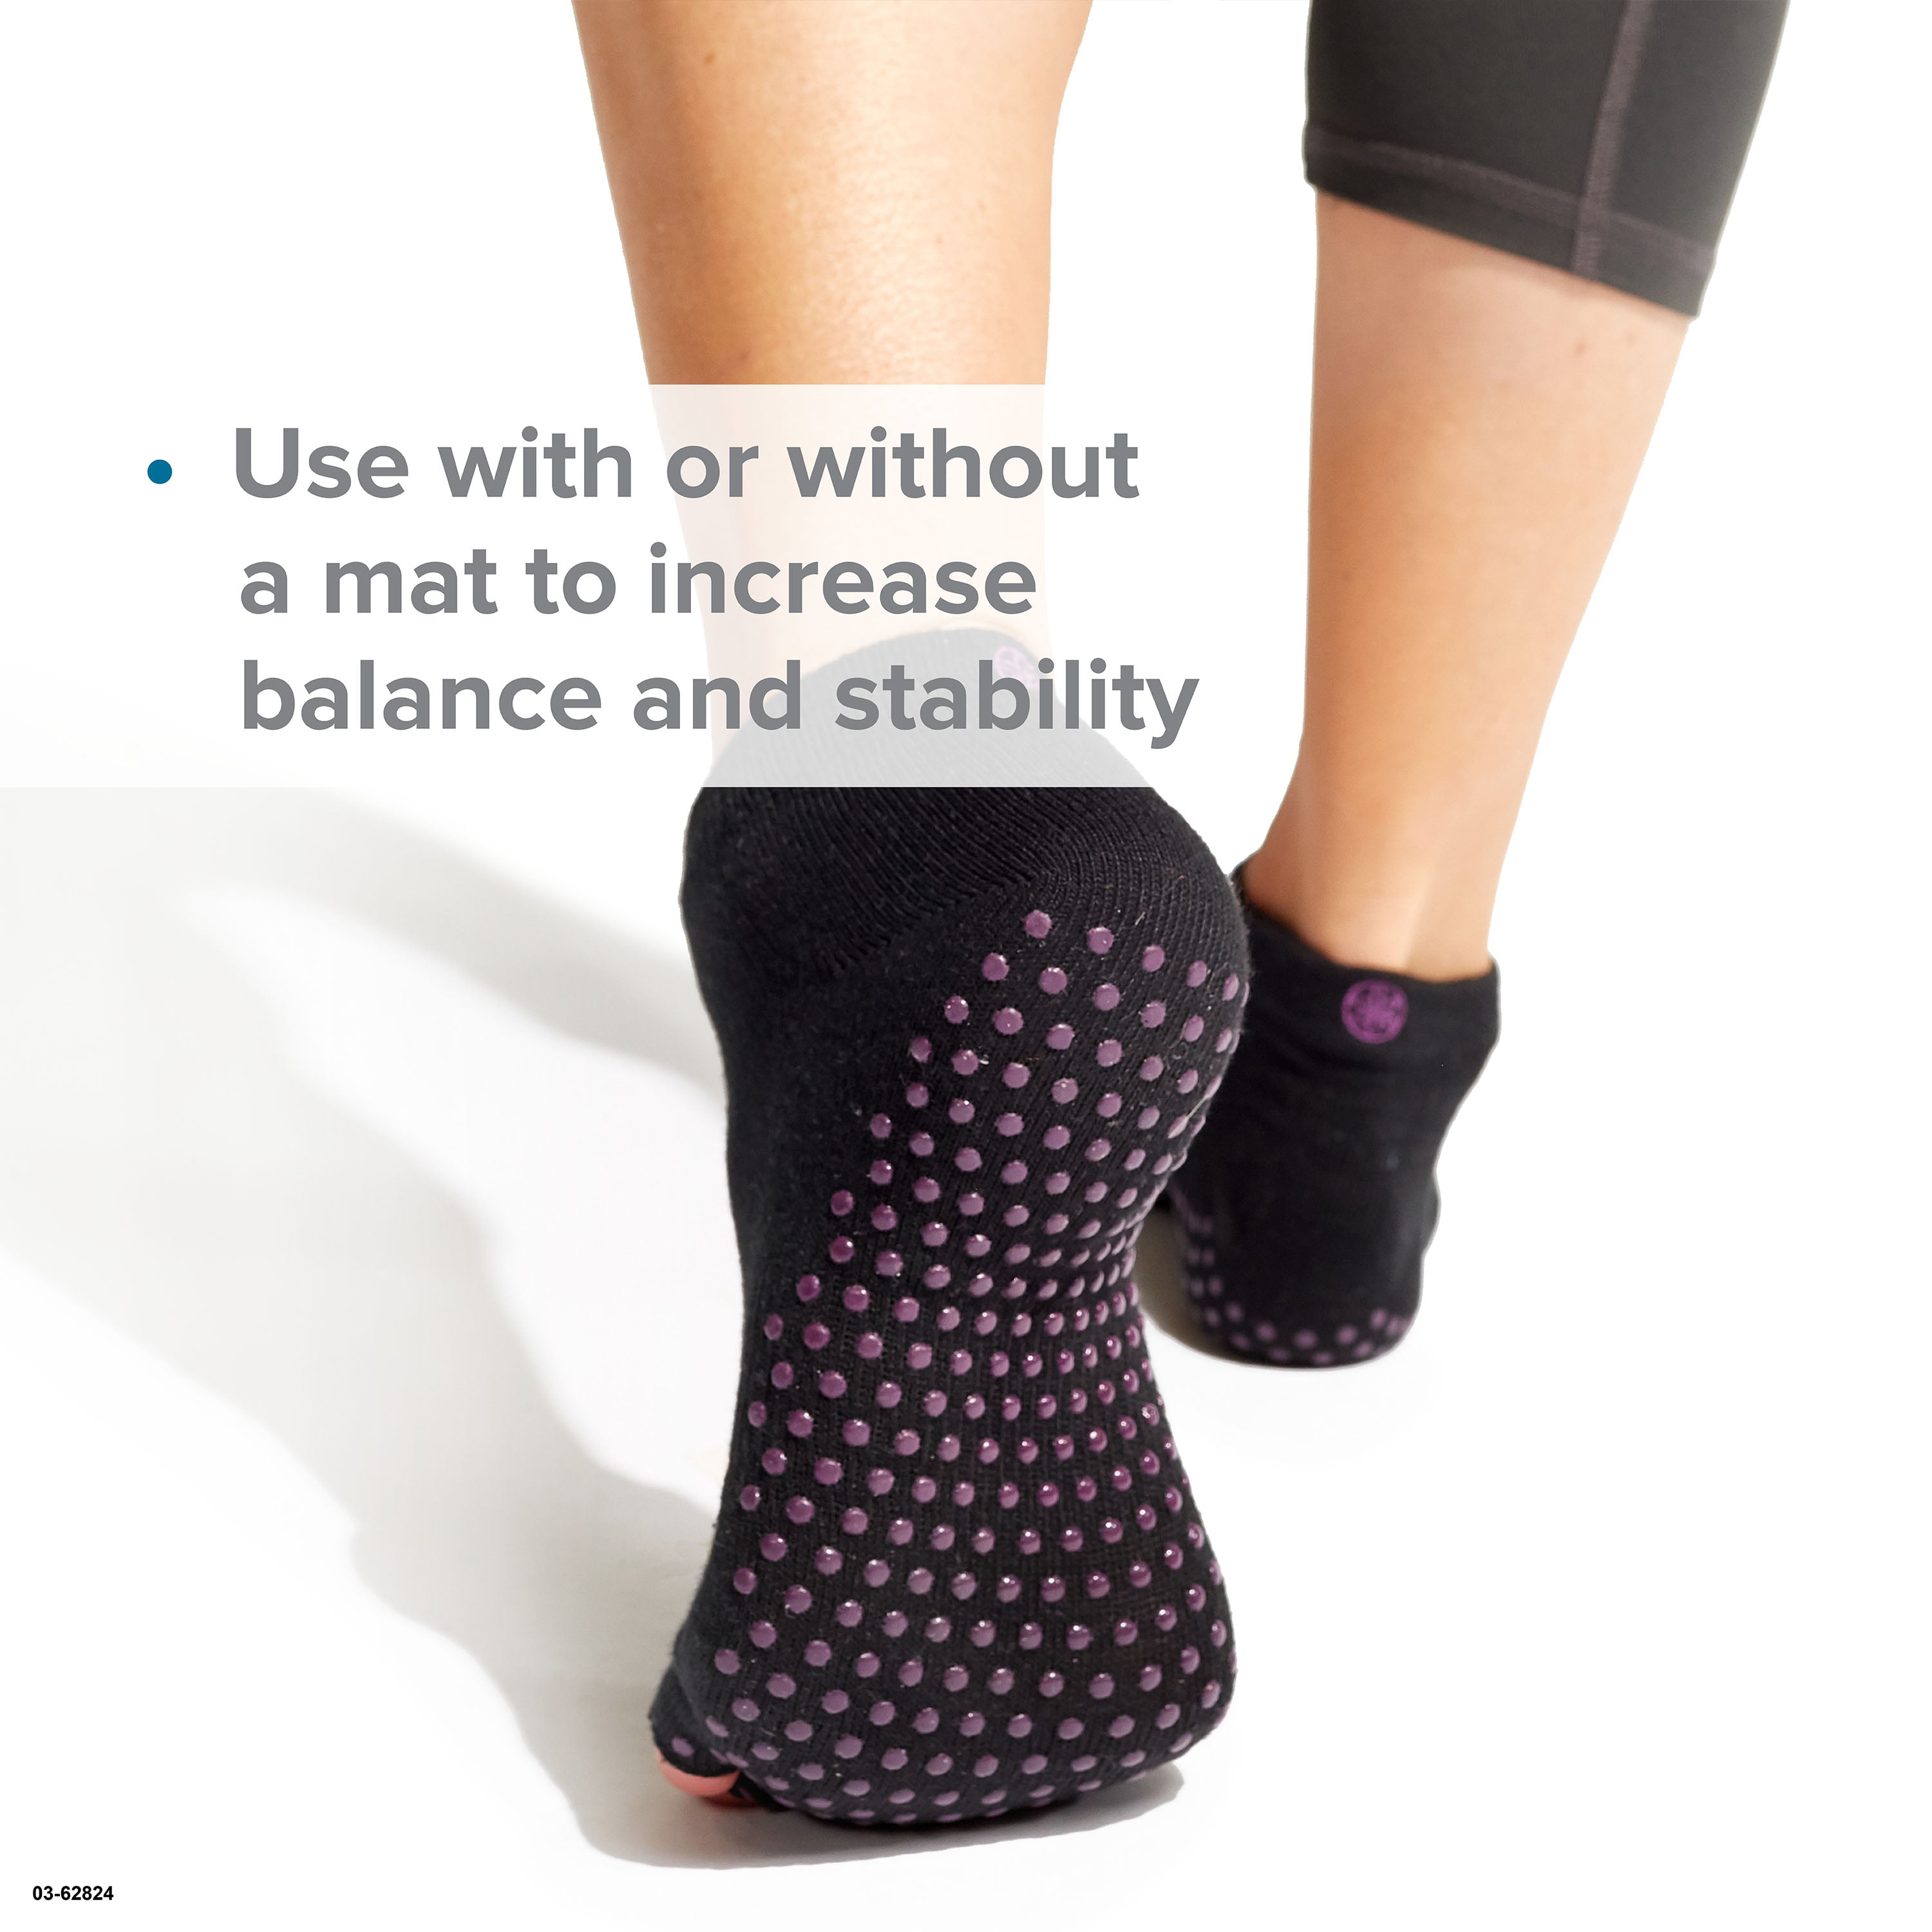 Buy GAIAM Toeless Grippy Sock Black/Grey 2-Pack - GAIAM, delivered to your  home